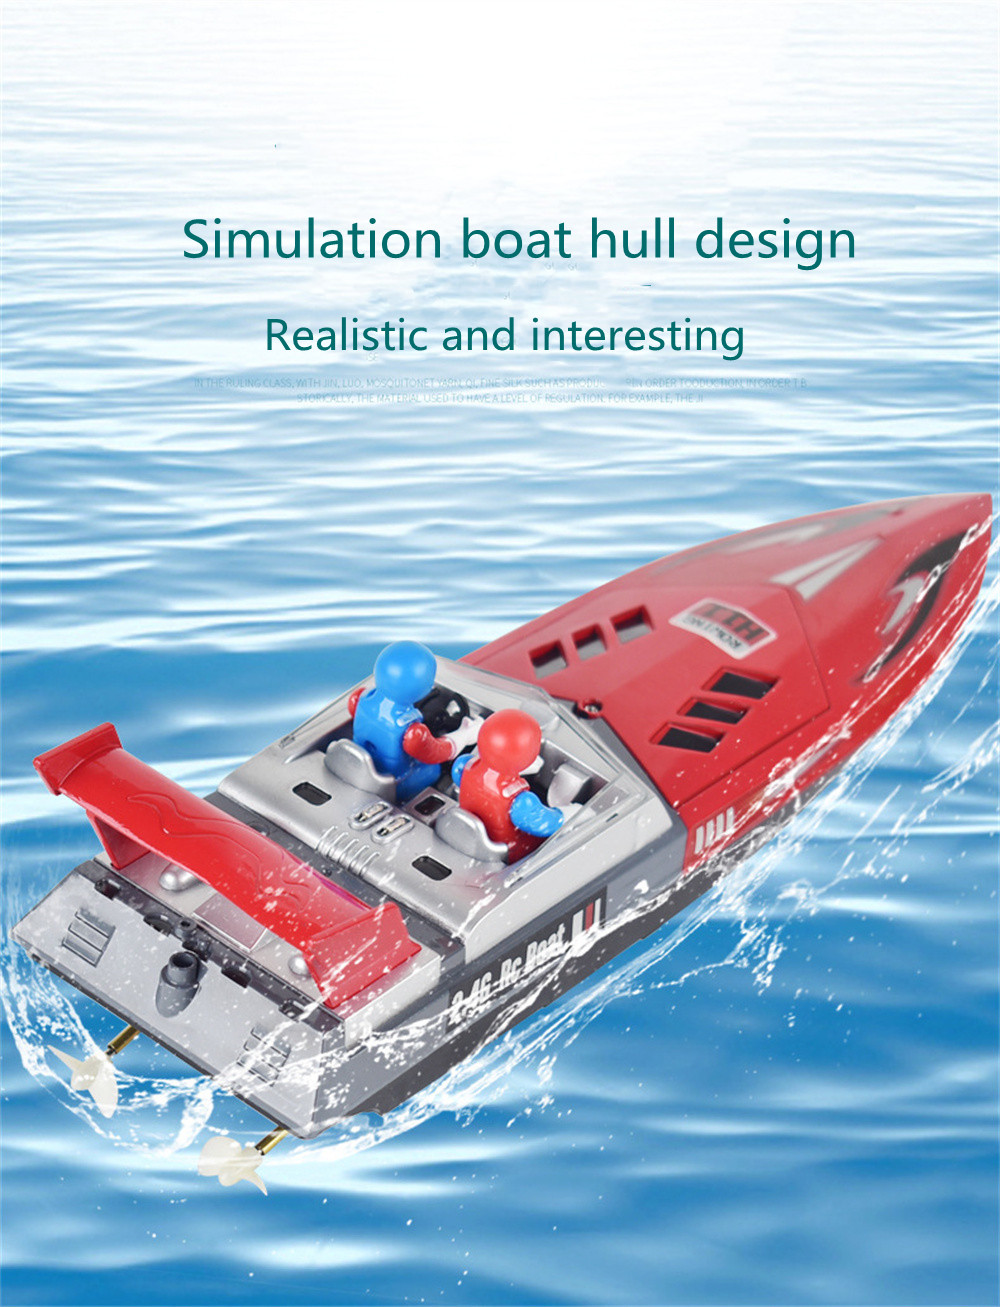 H11 2.4G 4CH RC Boat Vehicles Models High Speed Speedboat Waterproof 20km/h Electric Racing Lakes Pools Remote Control Toys